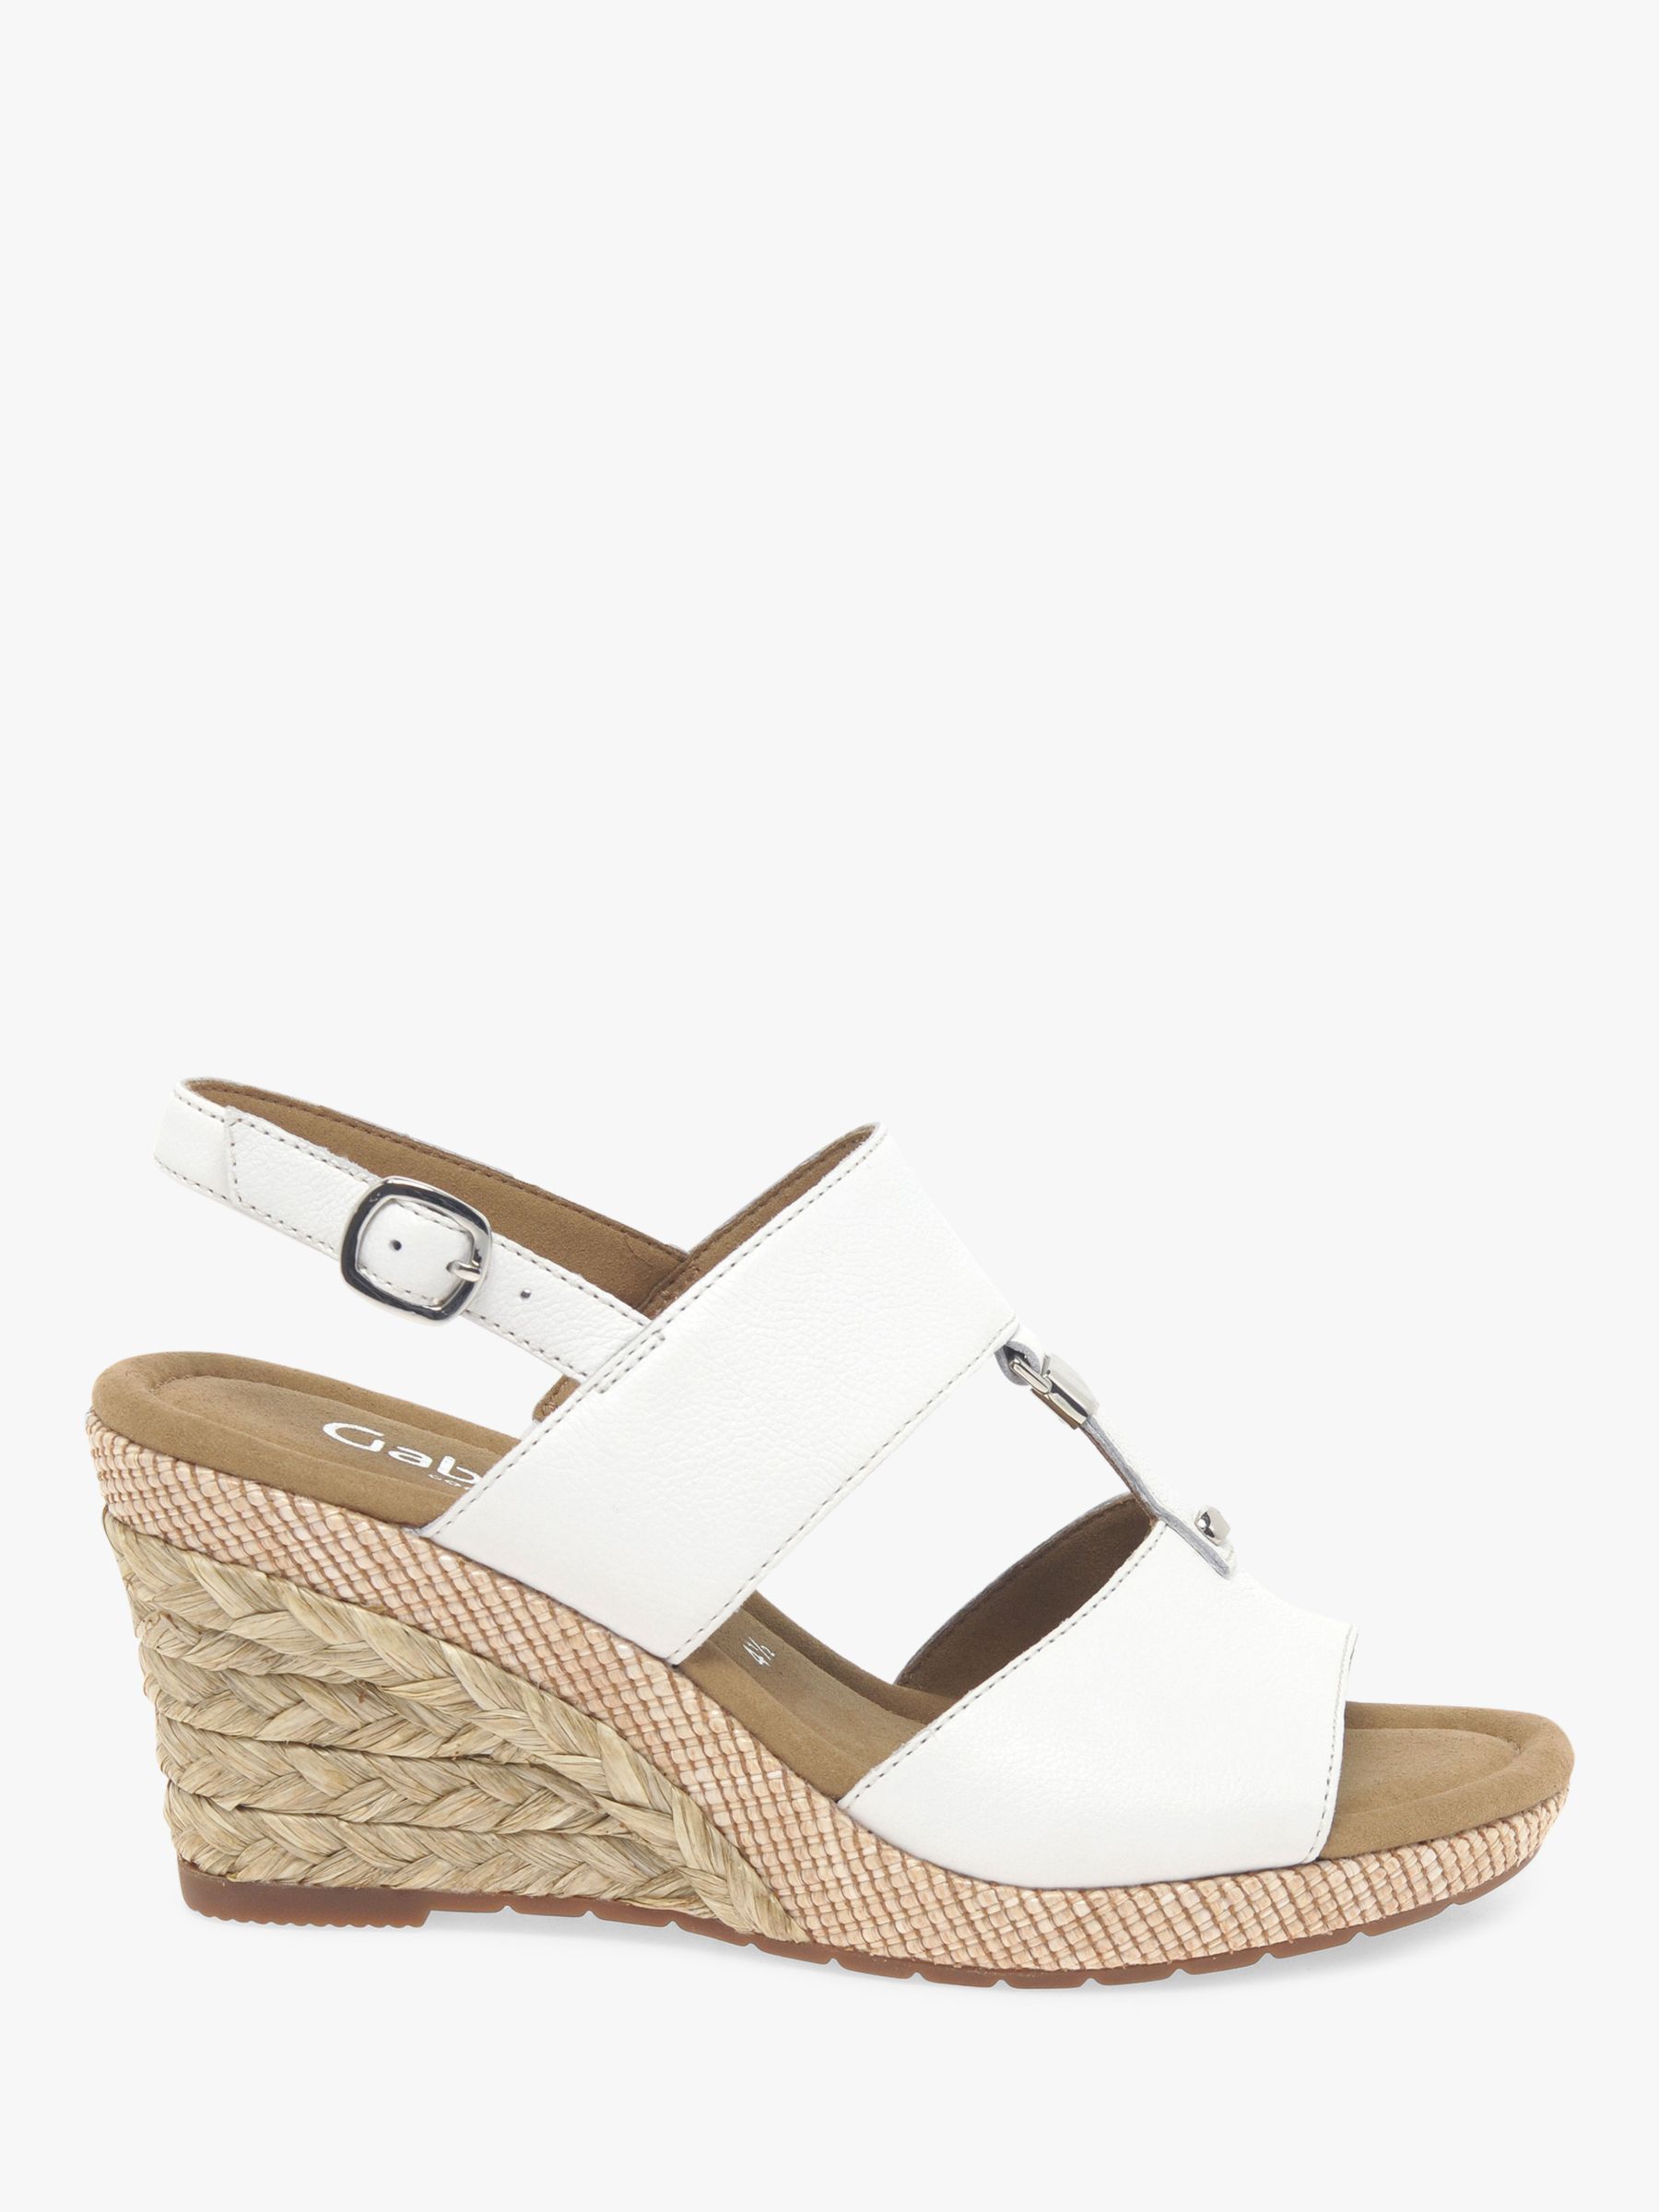 Gabor Keira Wide Fit Wedge Sandals